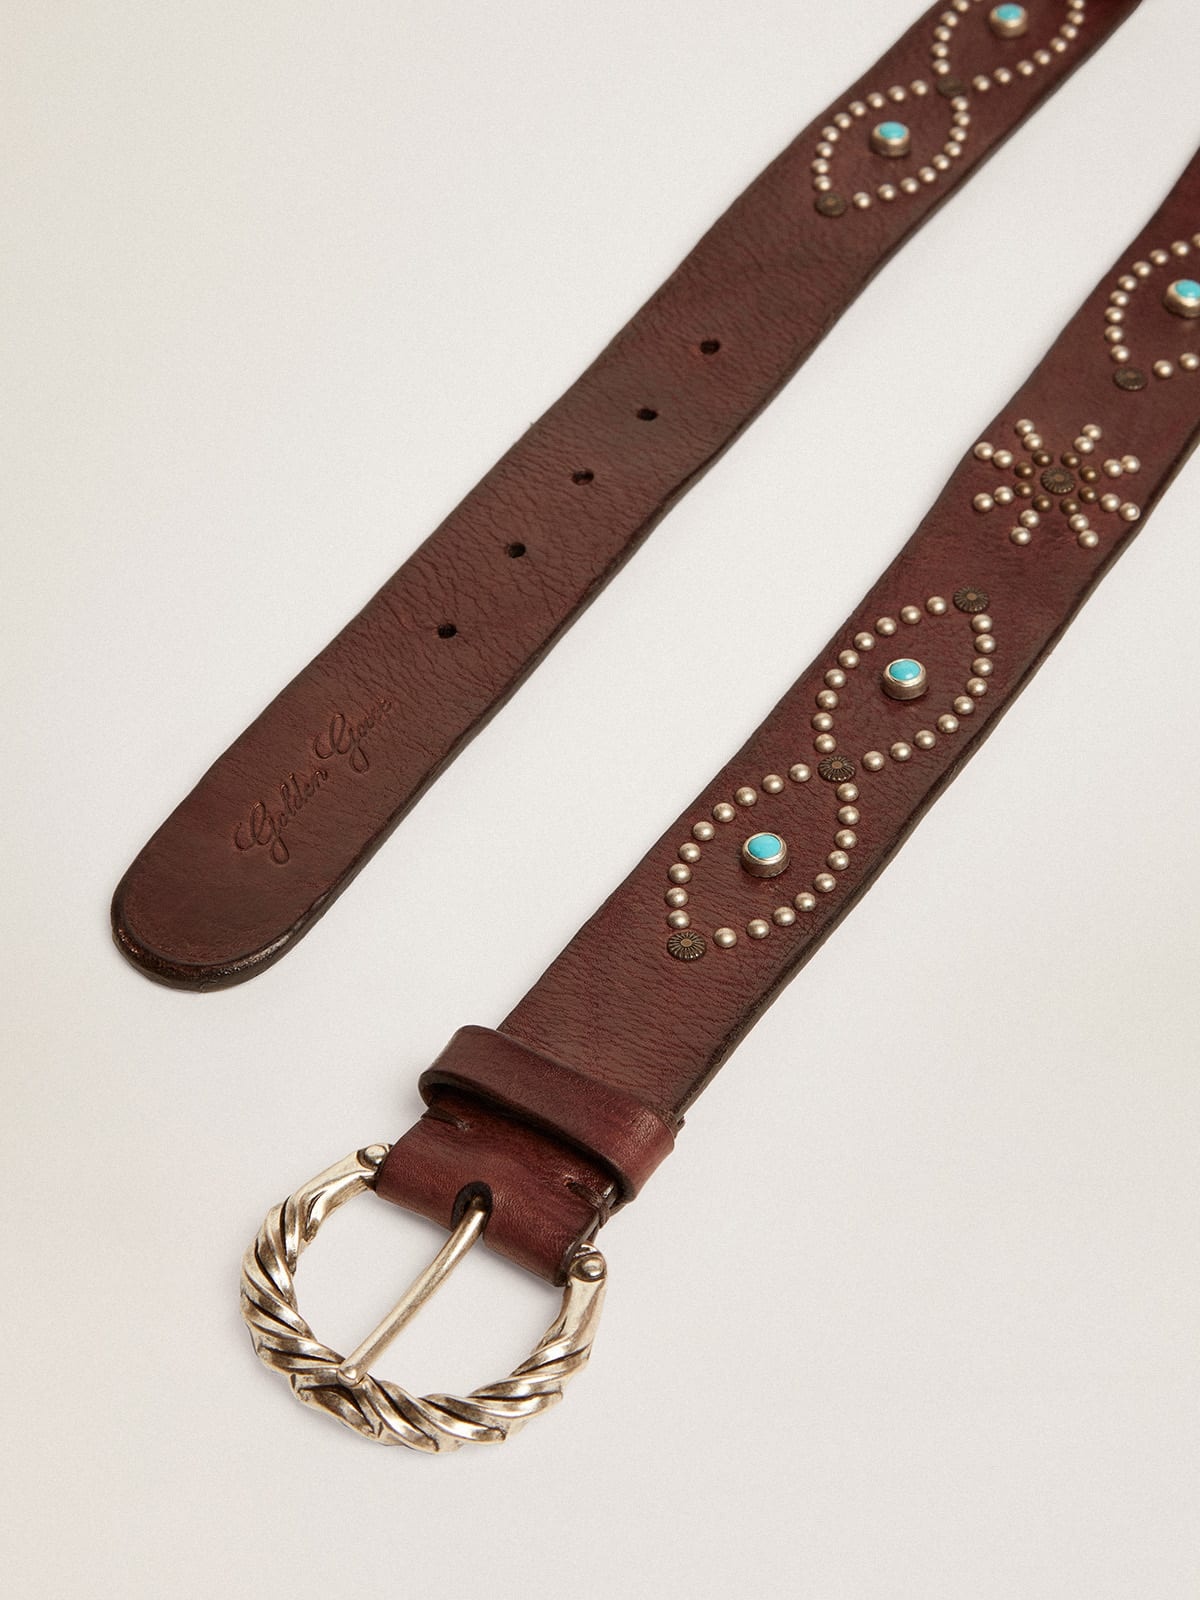 Women's belt in dark brown leather with colored studs - 2